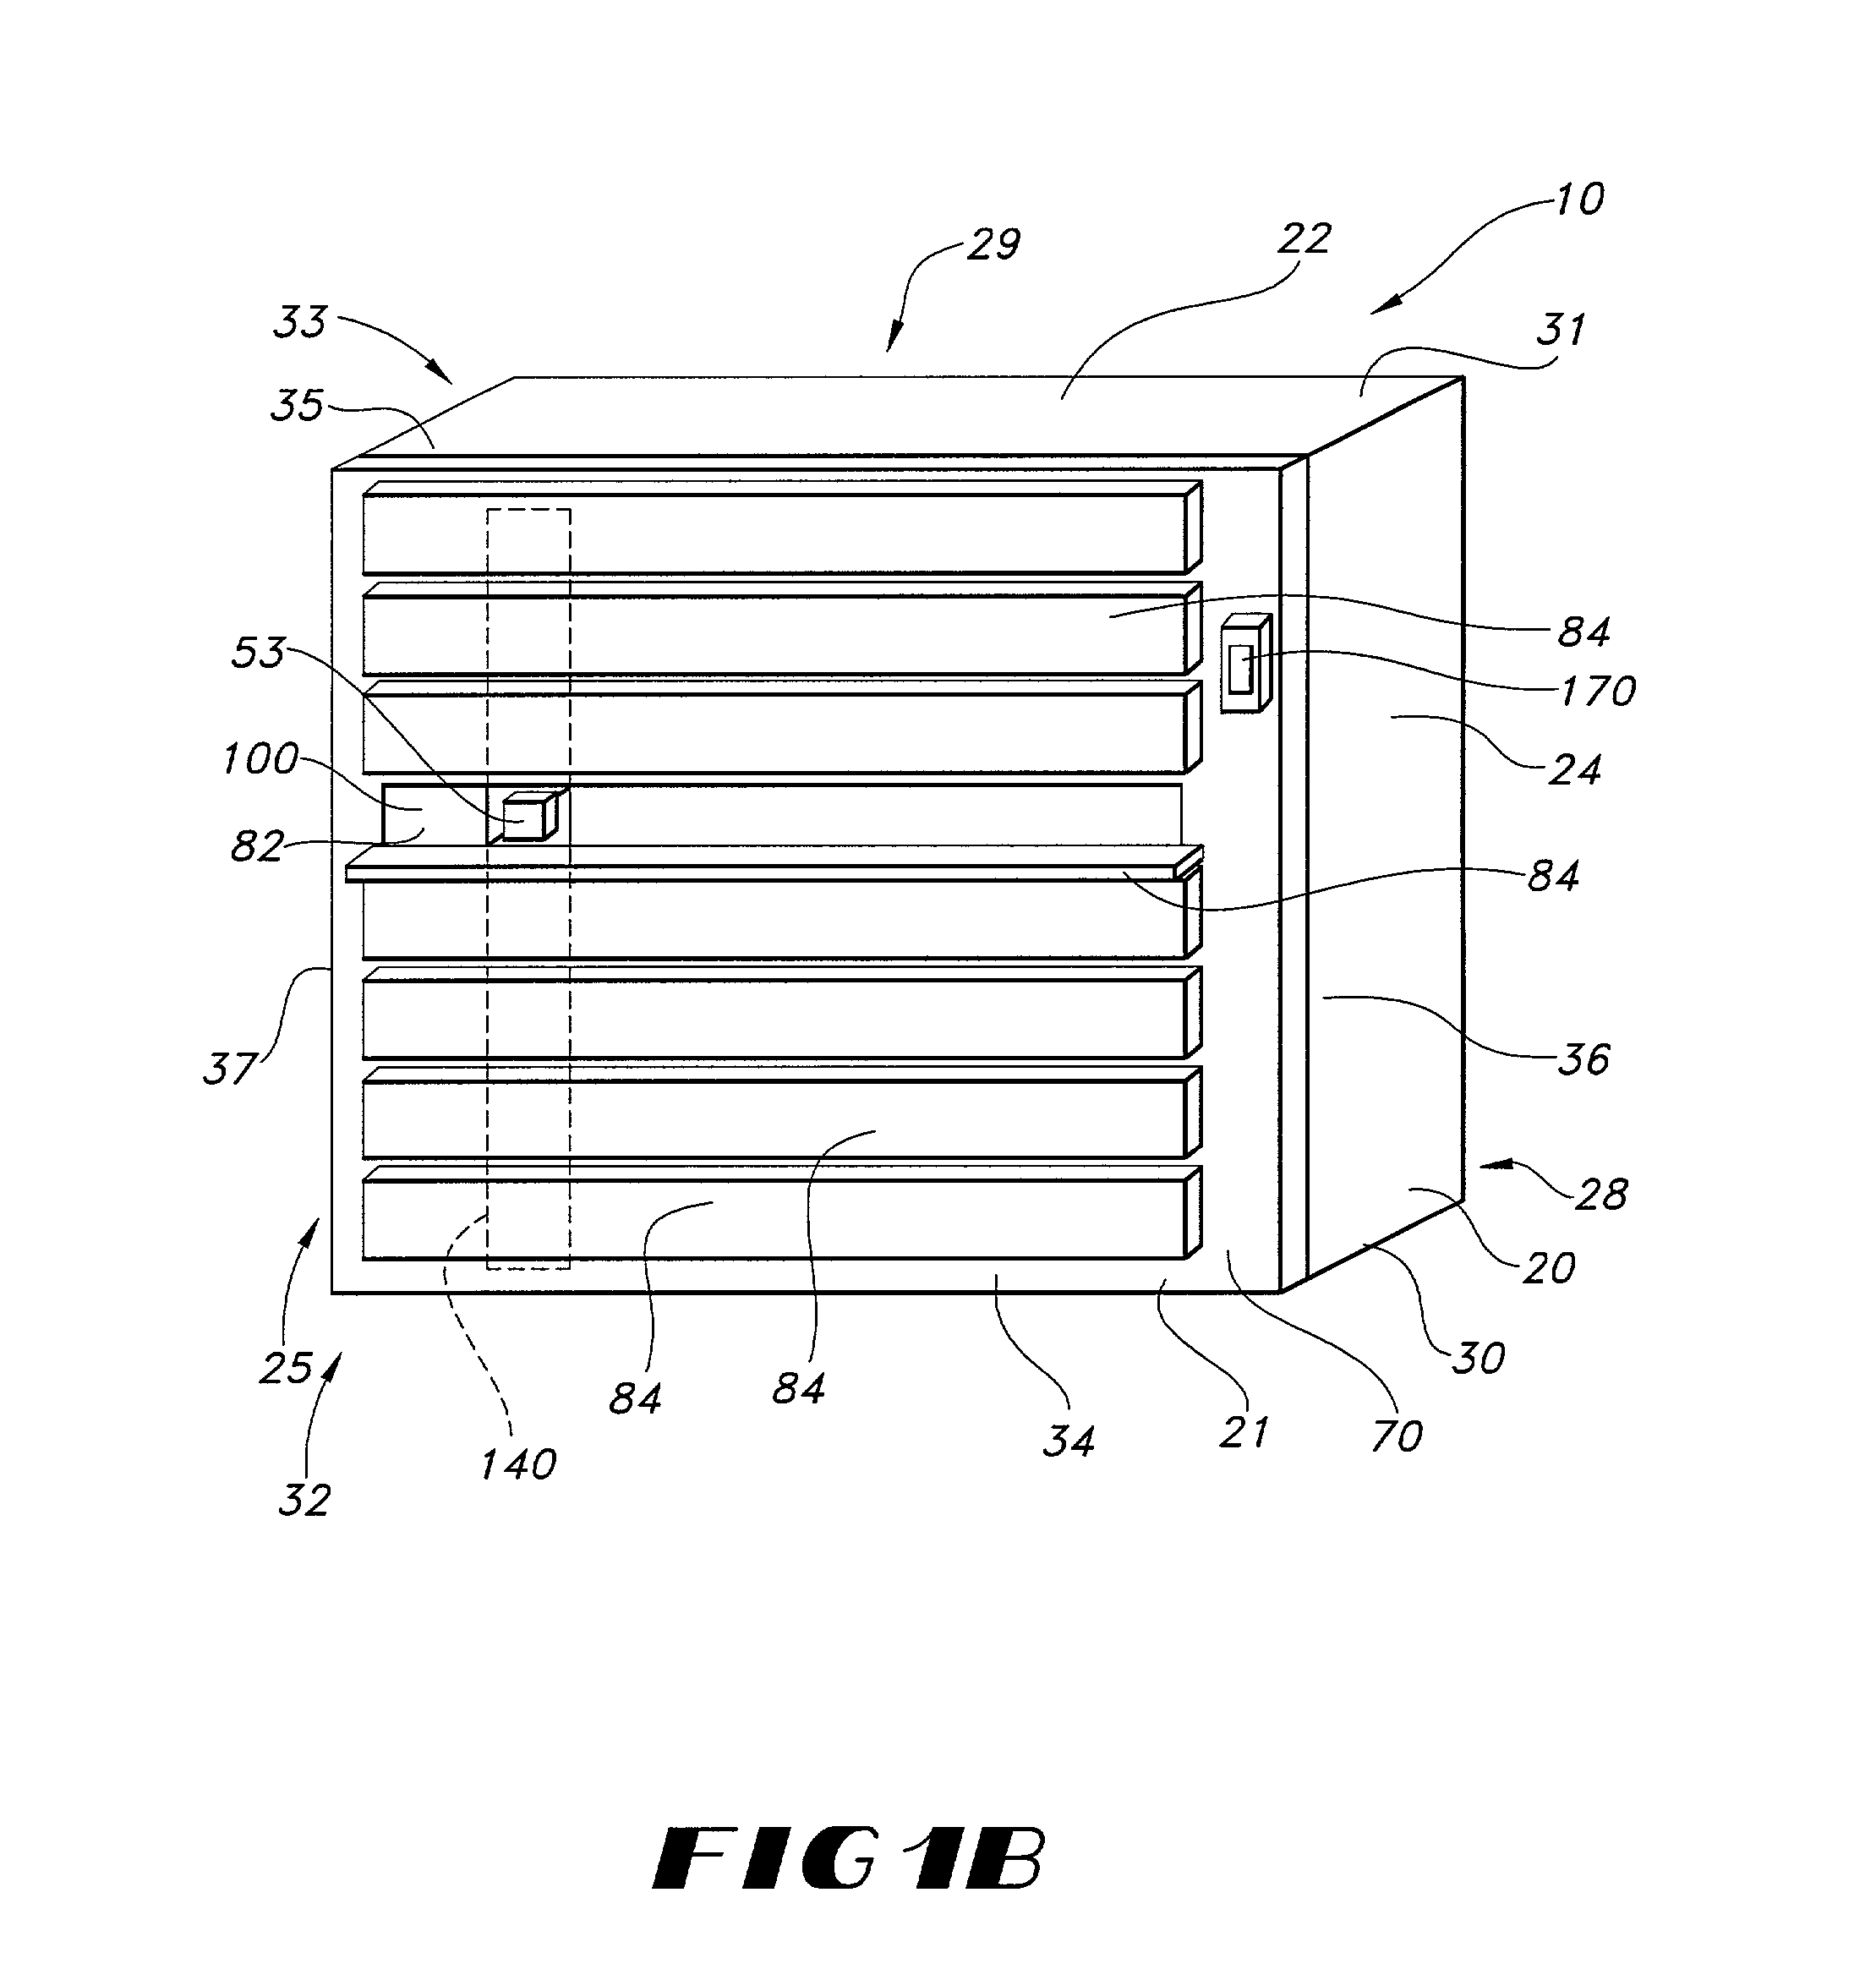 Garment dispensing and receiving apparatus having a removable cartridge body and a flexible dispensing door